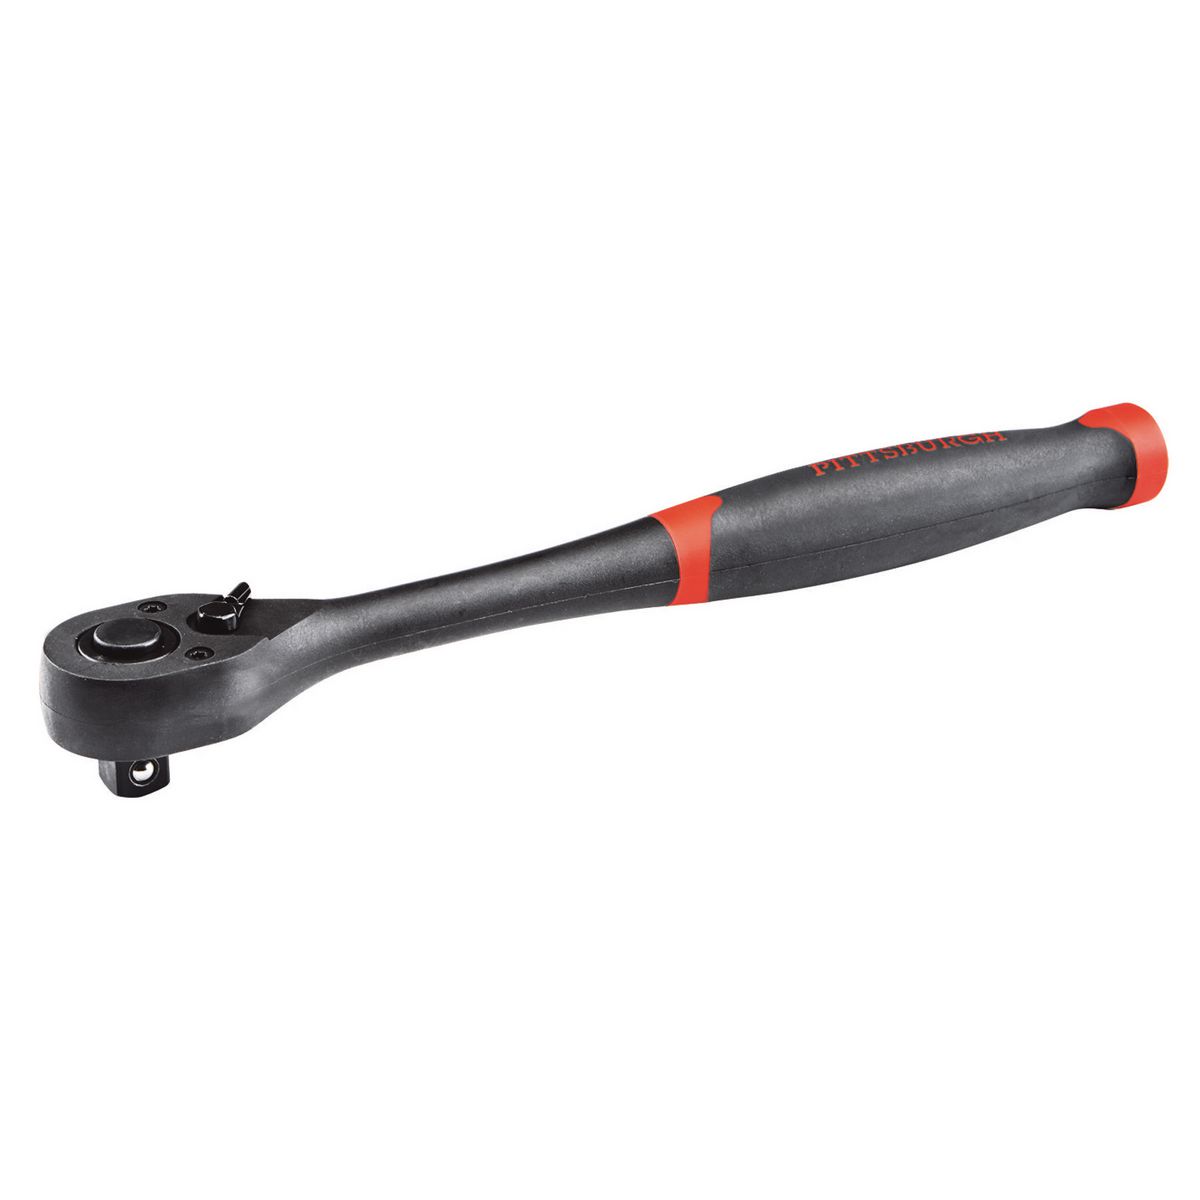 PITTSBURGH 1/2 in. Drive Composite Ratchet - Item 62618